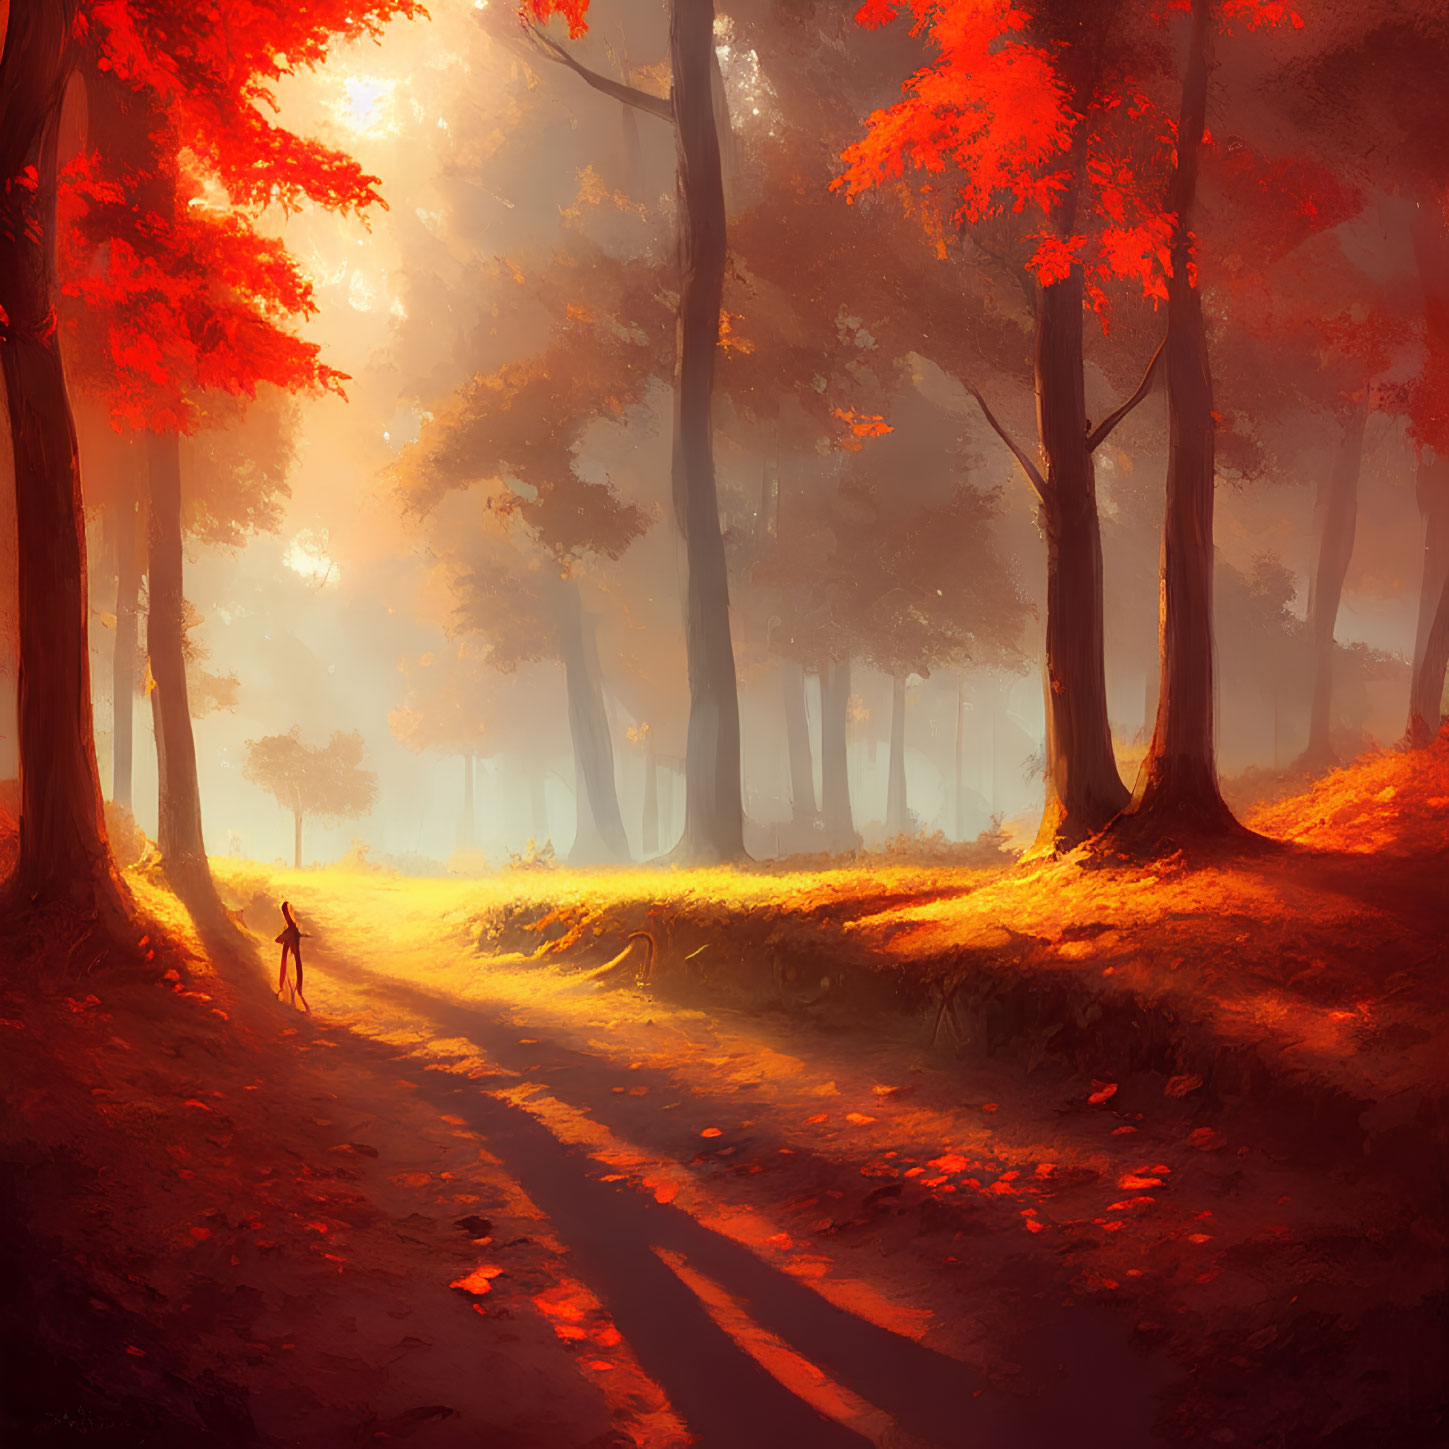 Autumnal forest scene with red leaves and warm sunlight